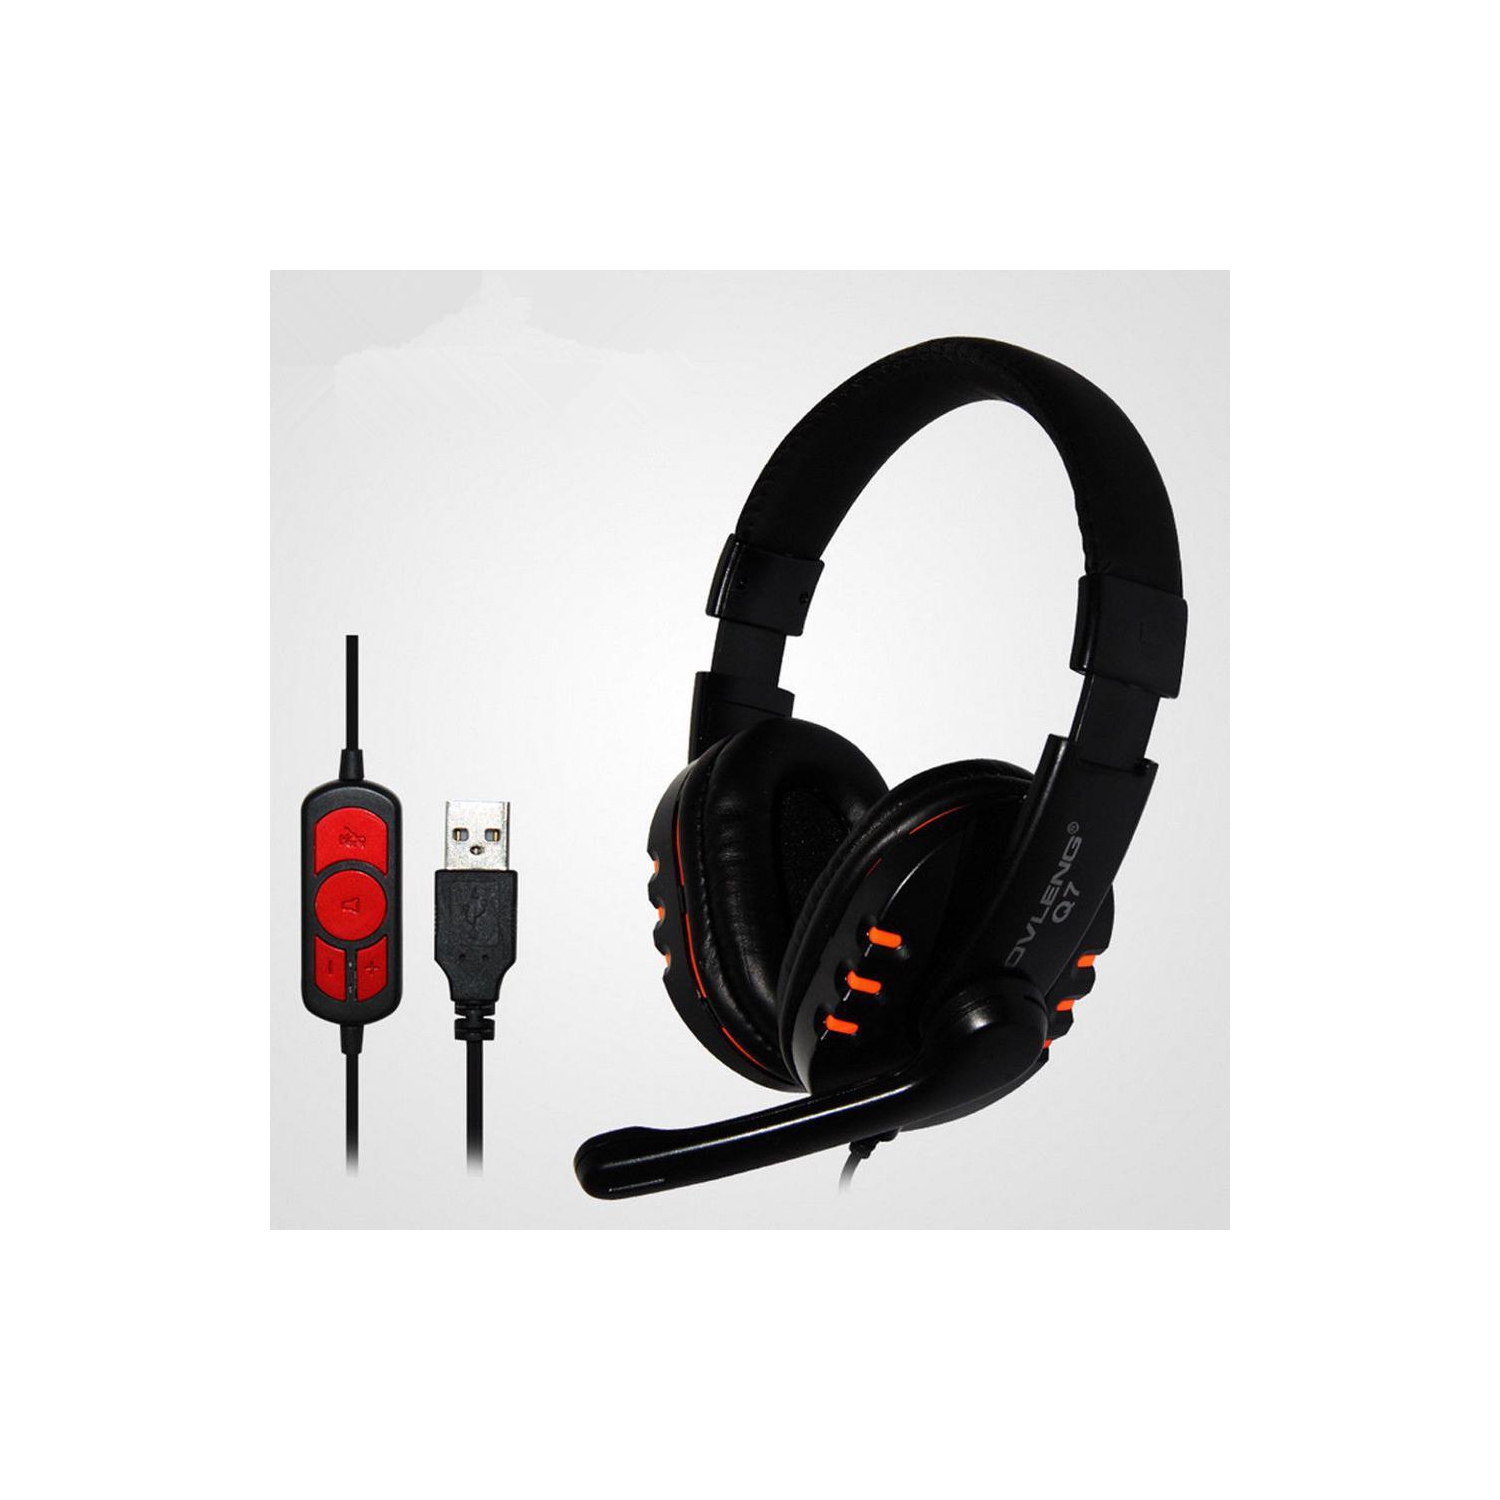 OVLENG Q7 USB Stereo Headphone Headset with Microphone & Volume Control for PC Laptop, Black & Orange